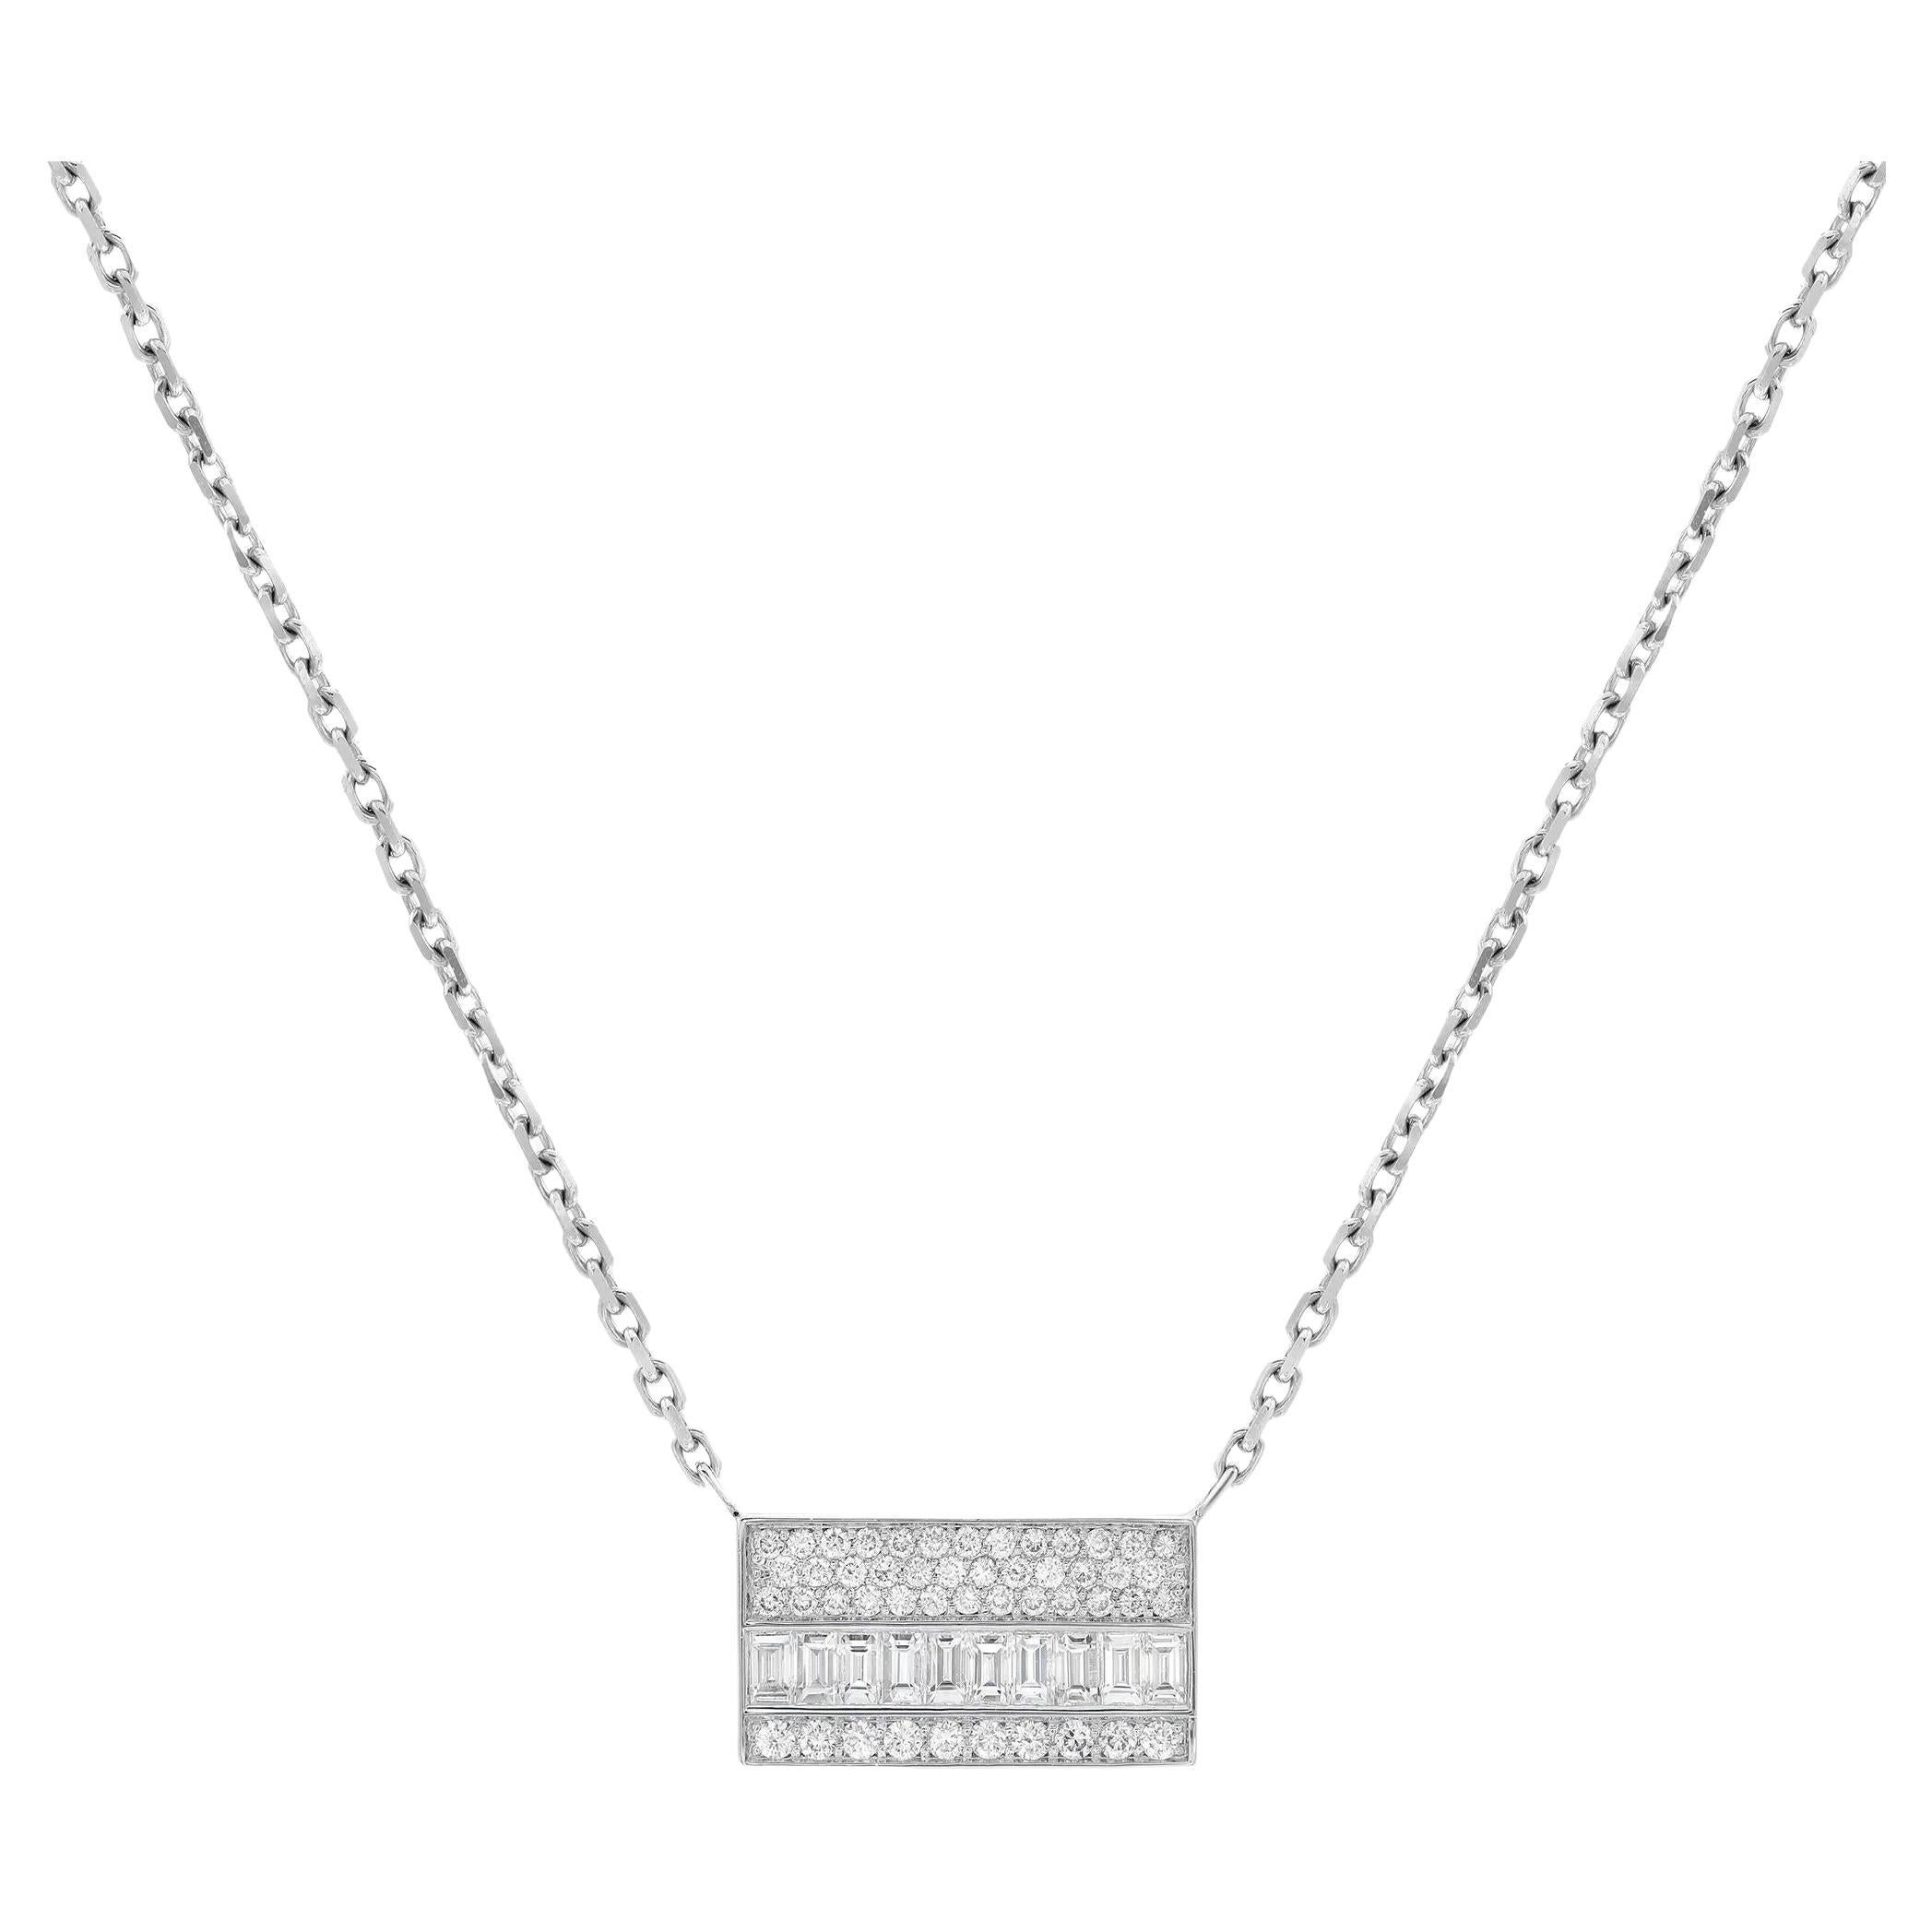 Fabulous and chic, this dazzling Messika Liz diamond pendant chain necklace is a standout addition to your every day and evening looks. This piece gives a touch of elegance to any ensemble you pair it with. Features channel set baguette and pave set